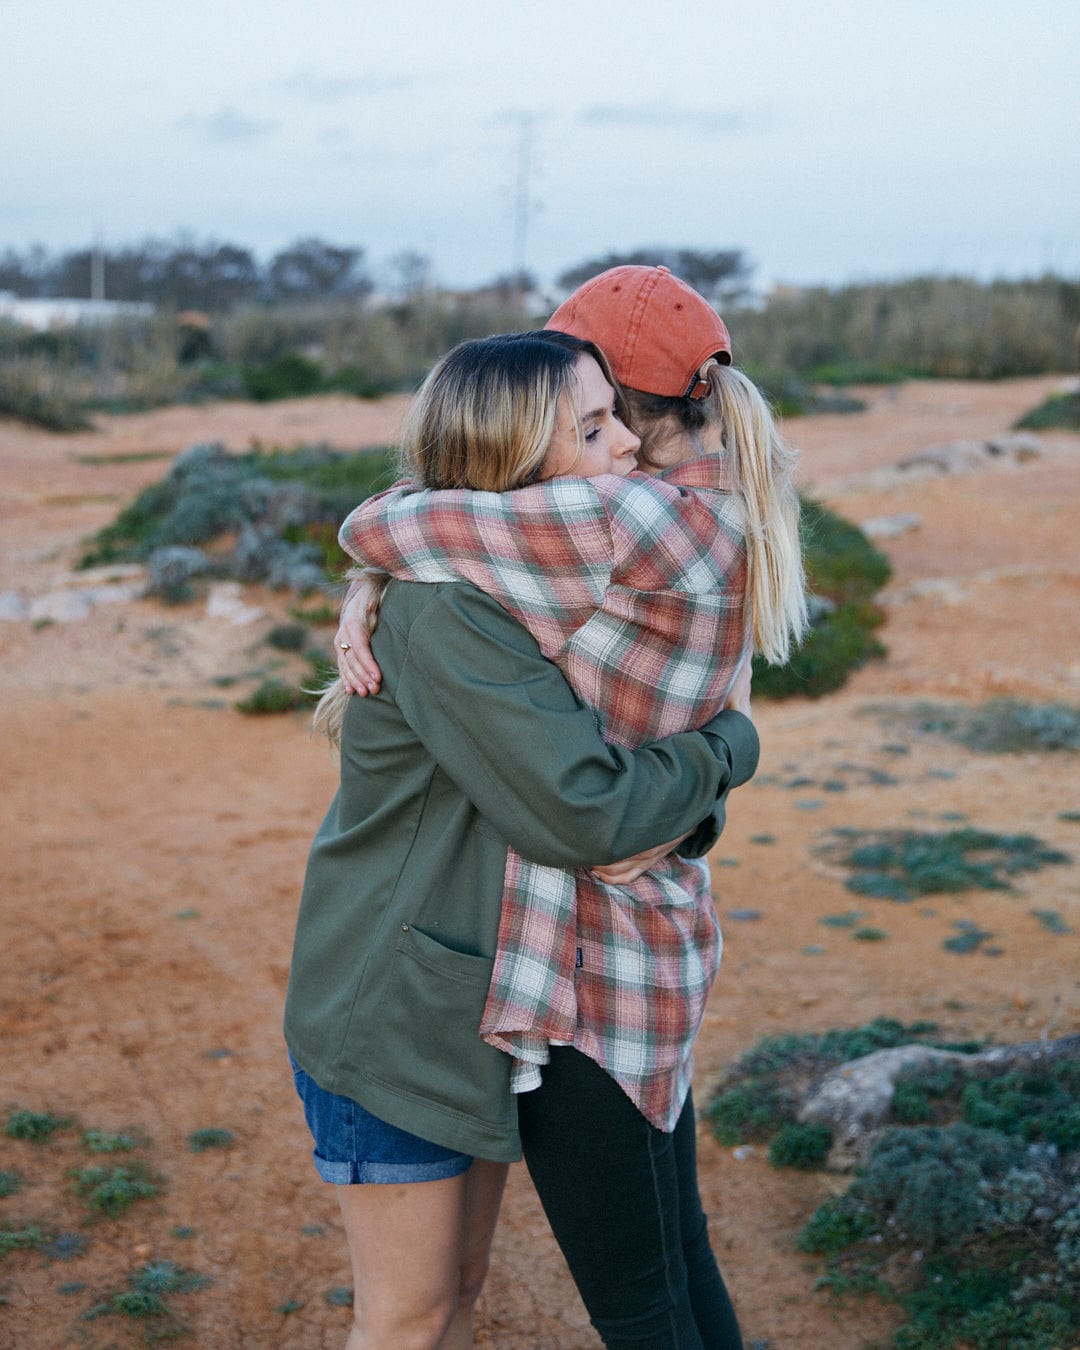 Two people embracing outdoors, one wearing a Saltrock Rosalin - Womens Long Sleeve Shirt in Orange/green with contrasting buttons.